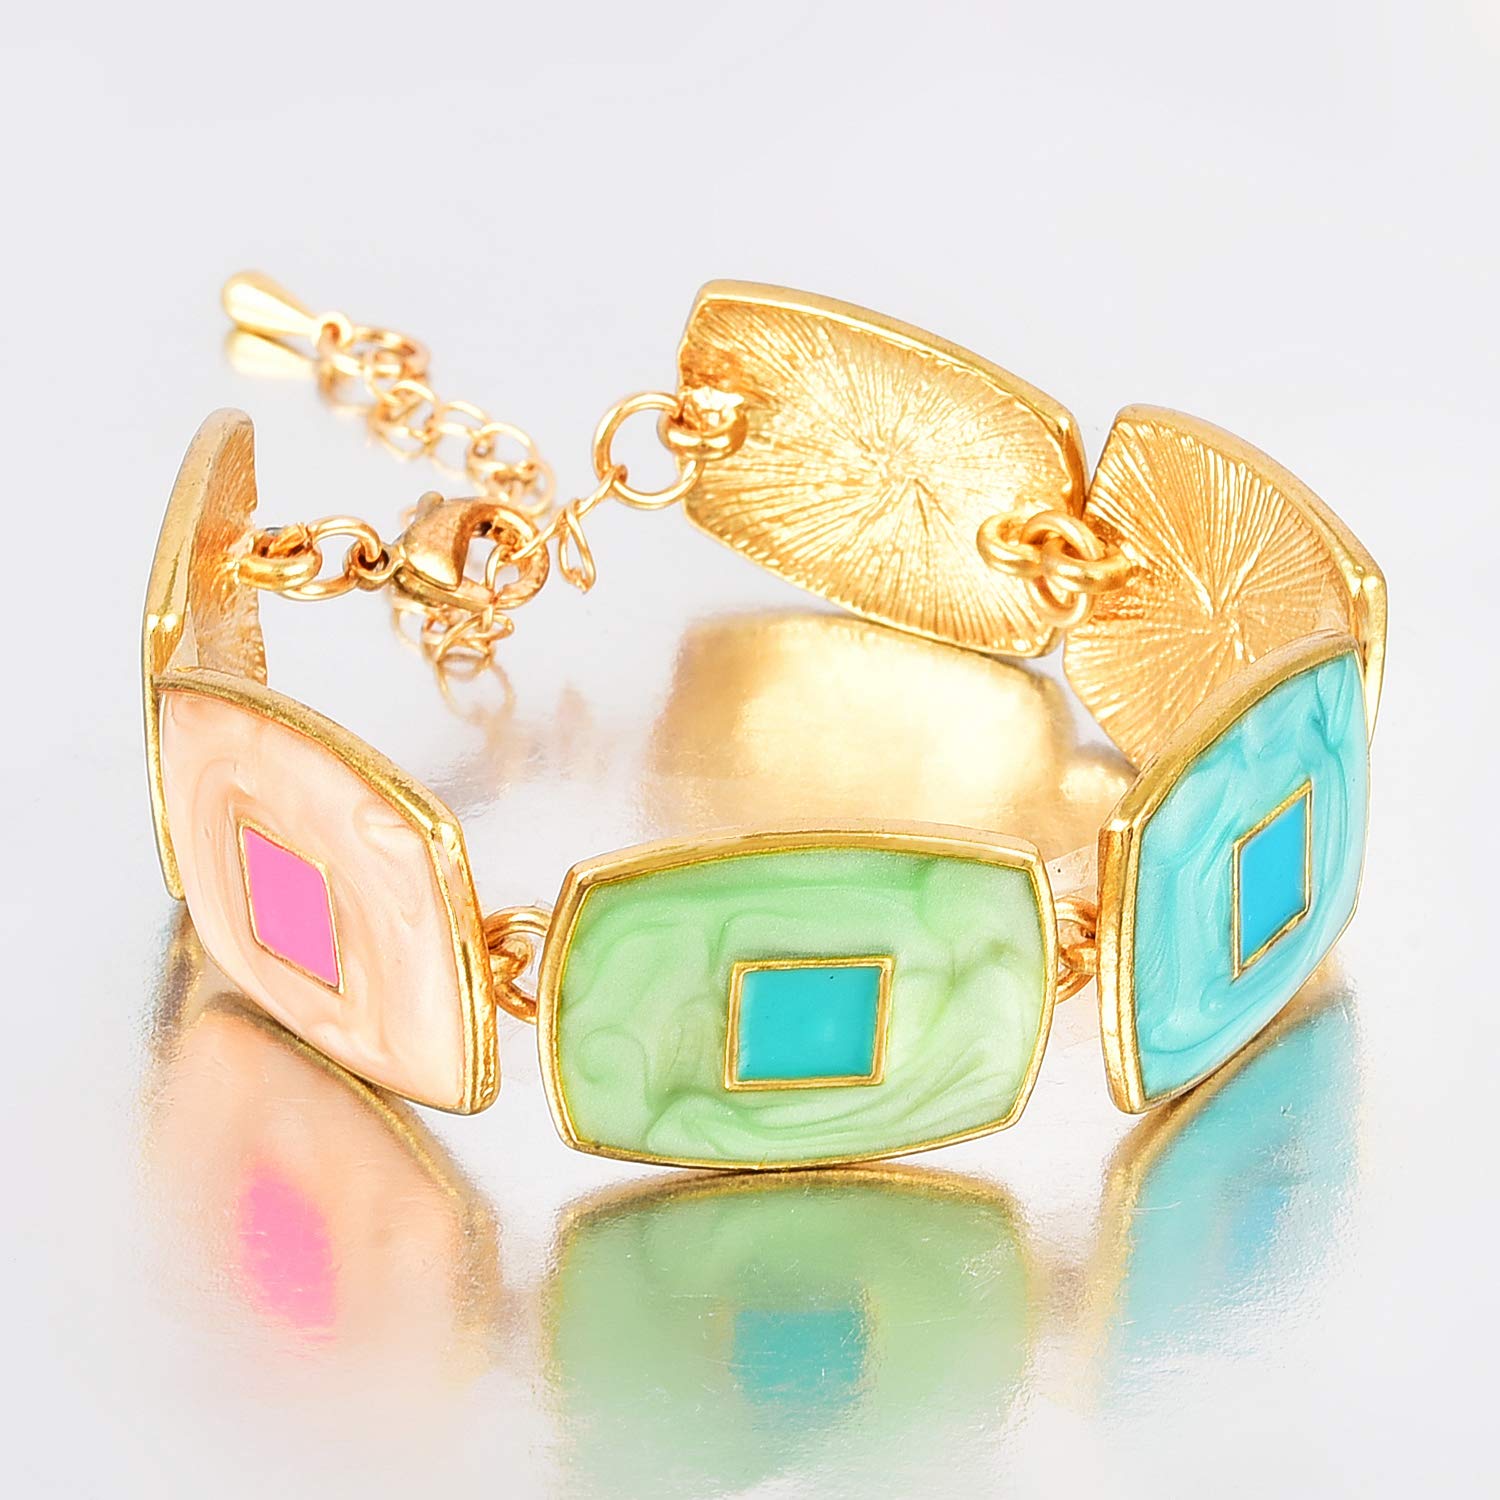 Yellow Chimes Classical Contemporary Fashion Bracelet for Women and Girls.